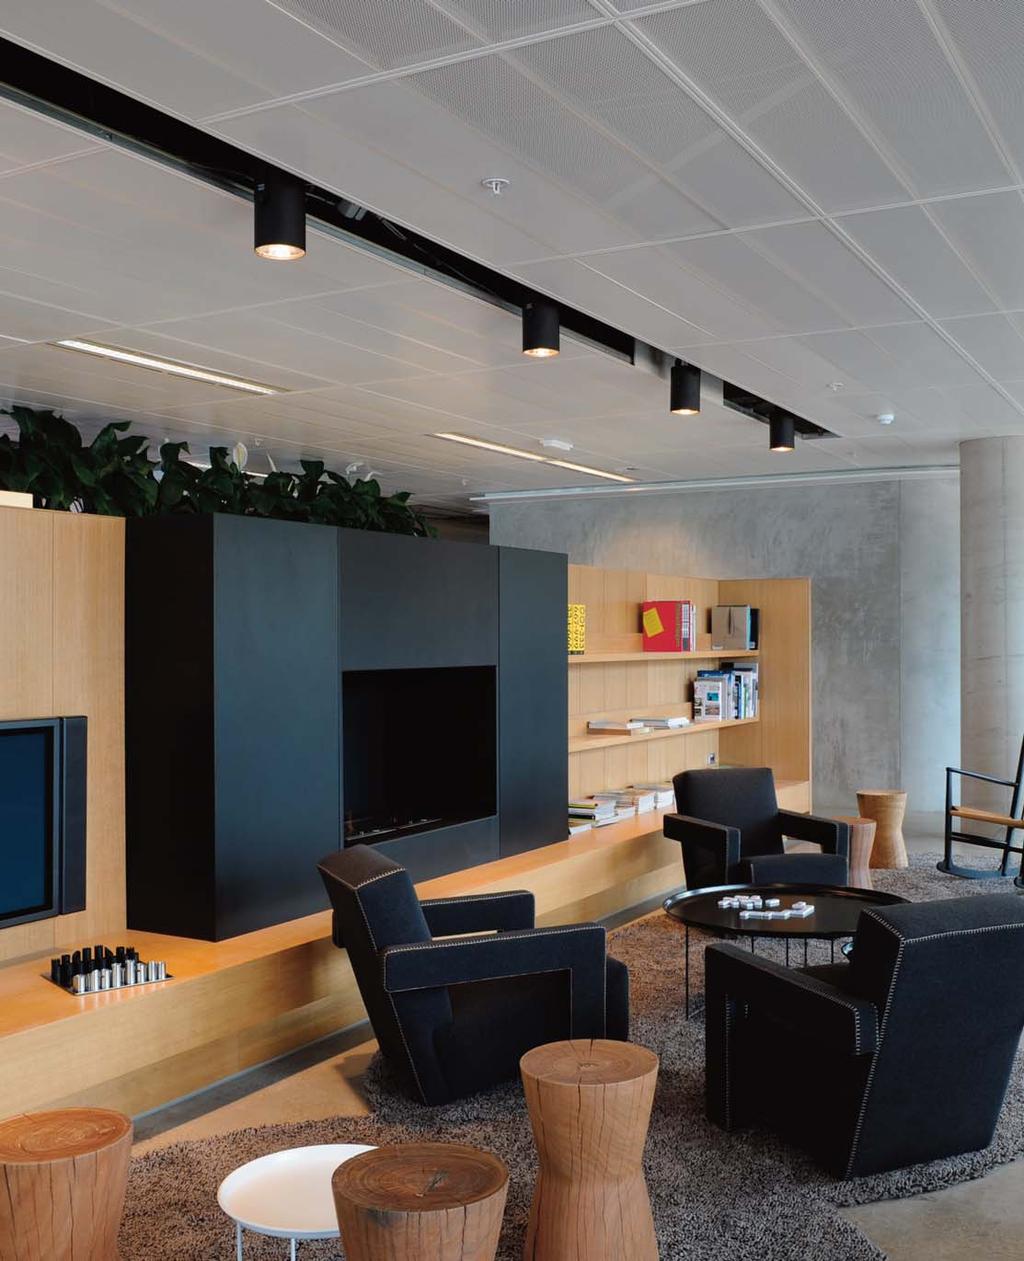 SUSPENSION SYSTEMS CONTENT Modular Ceiling Systems